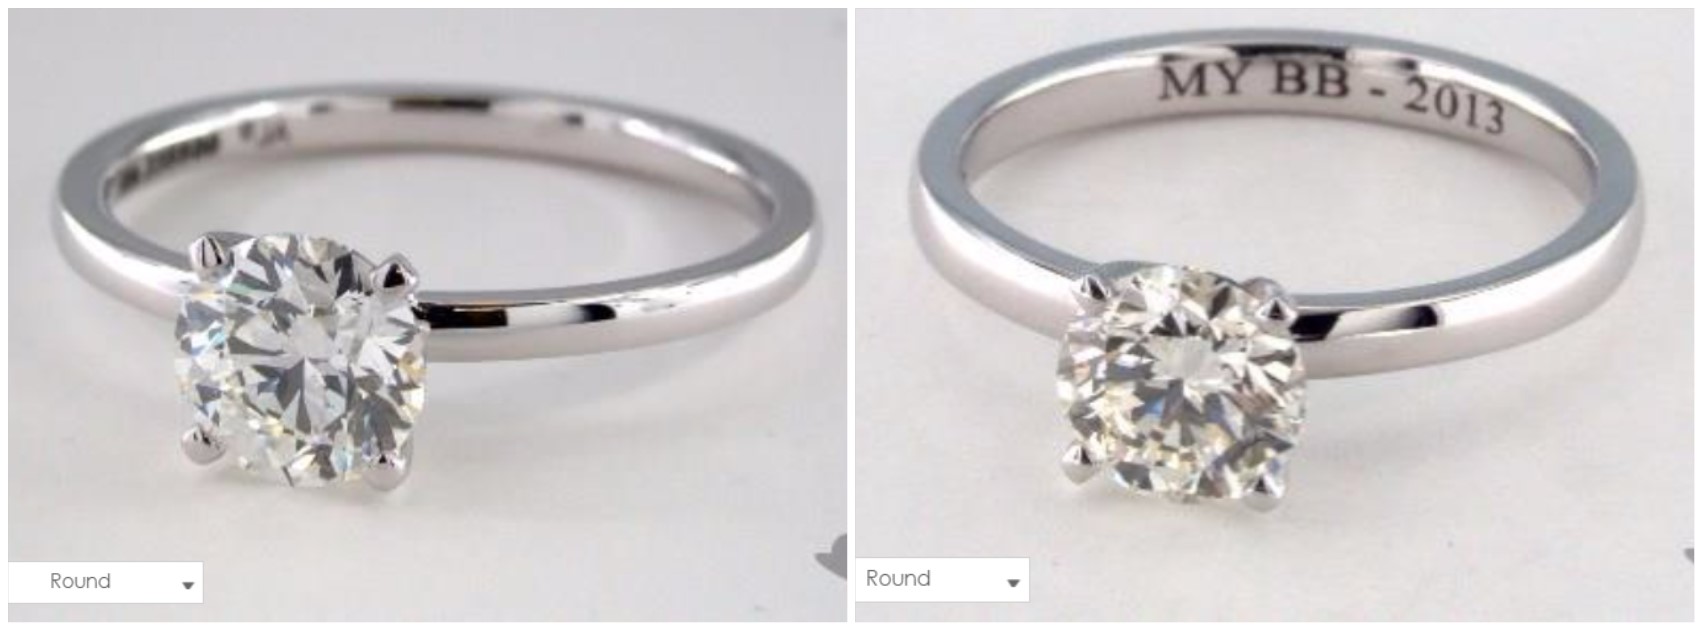 Why H Diamond Color Is Good Enough For The Best Value